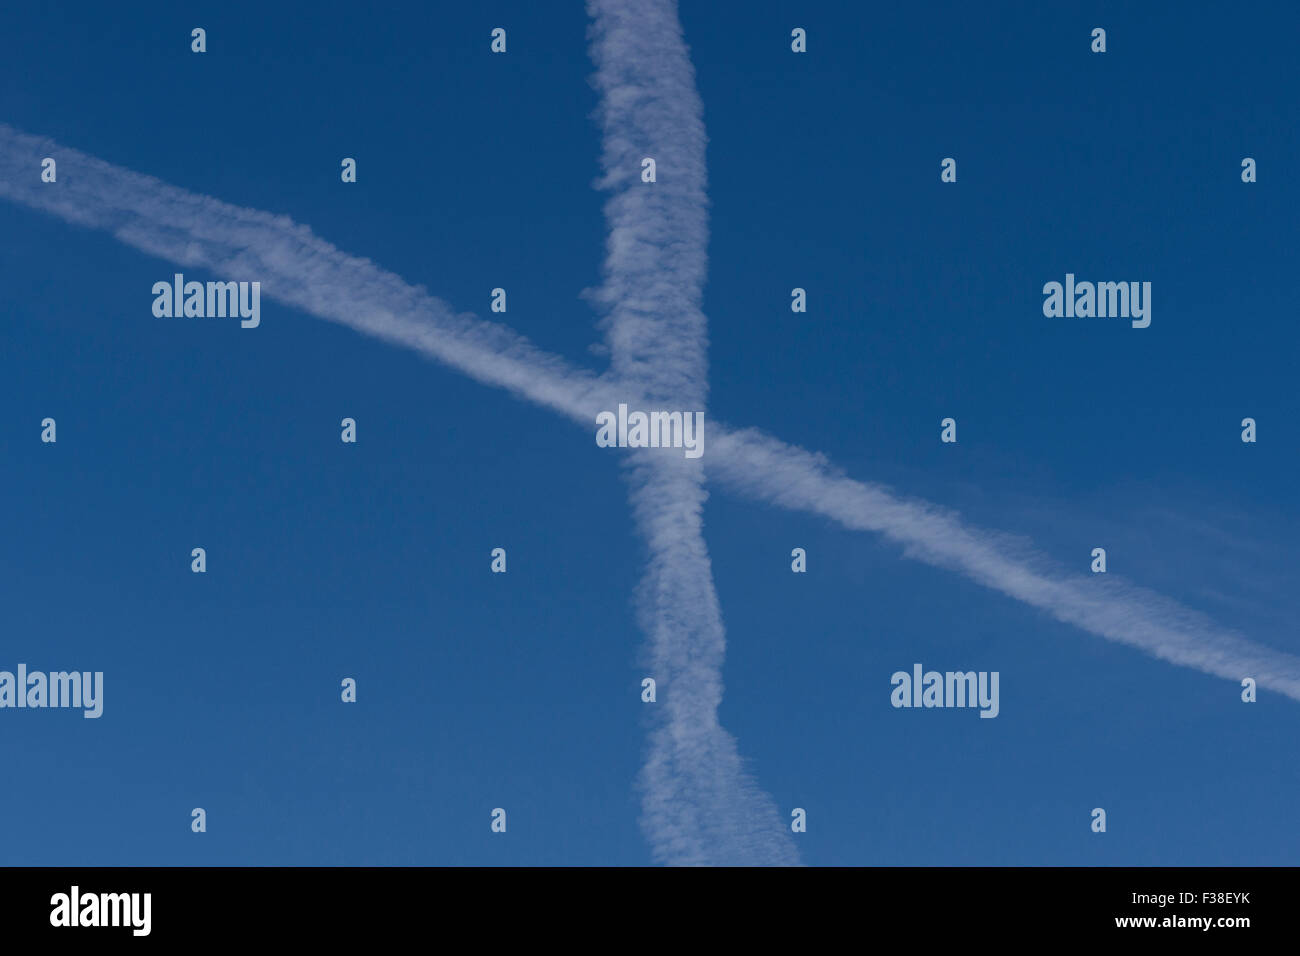 Two aircraft vapour trails crossing over in clear blue sky. Stock Photo